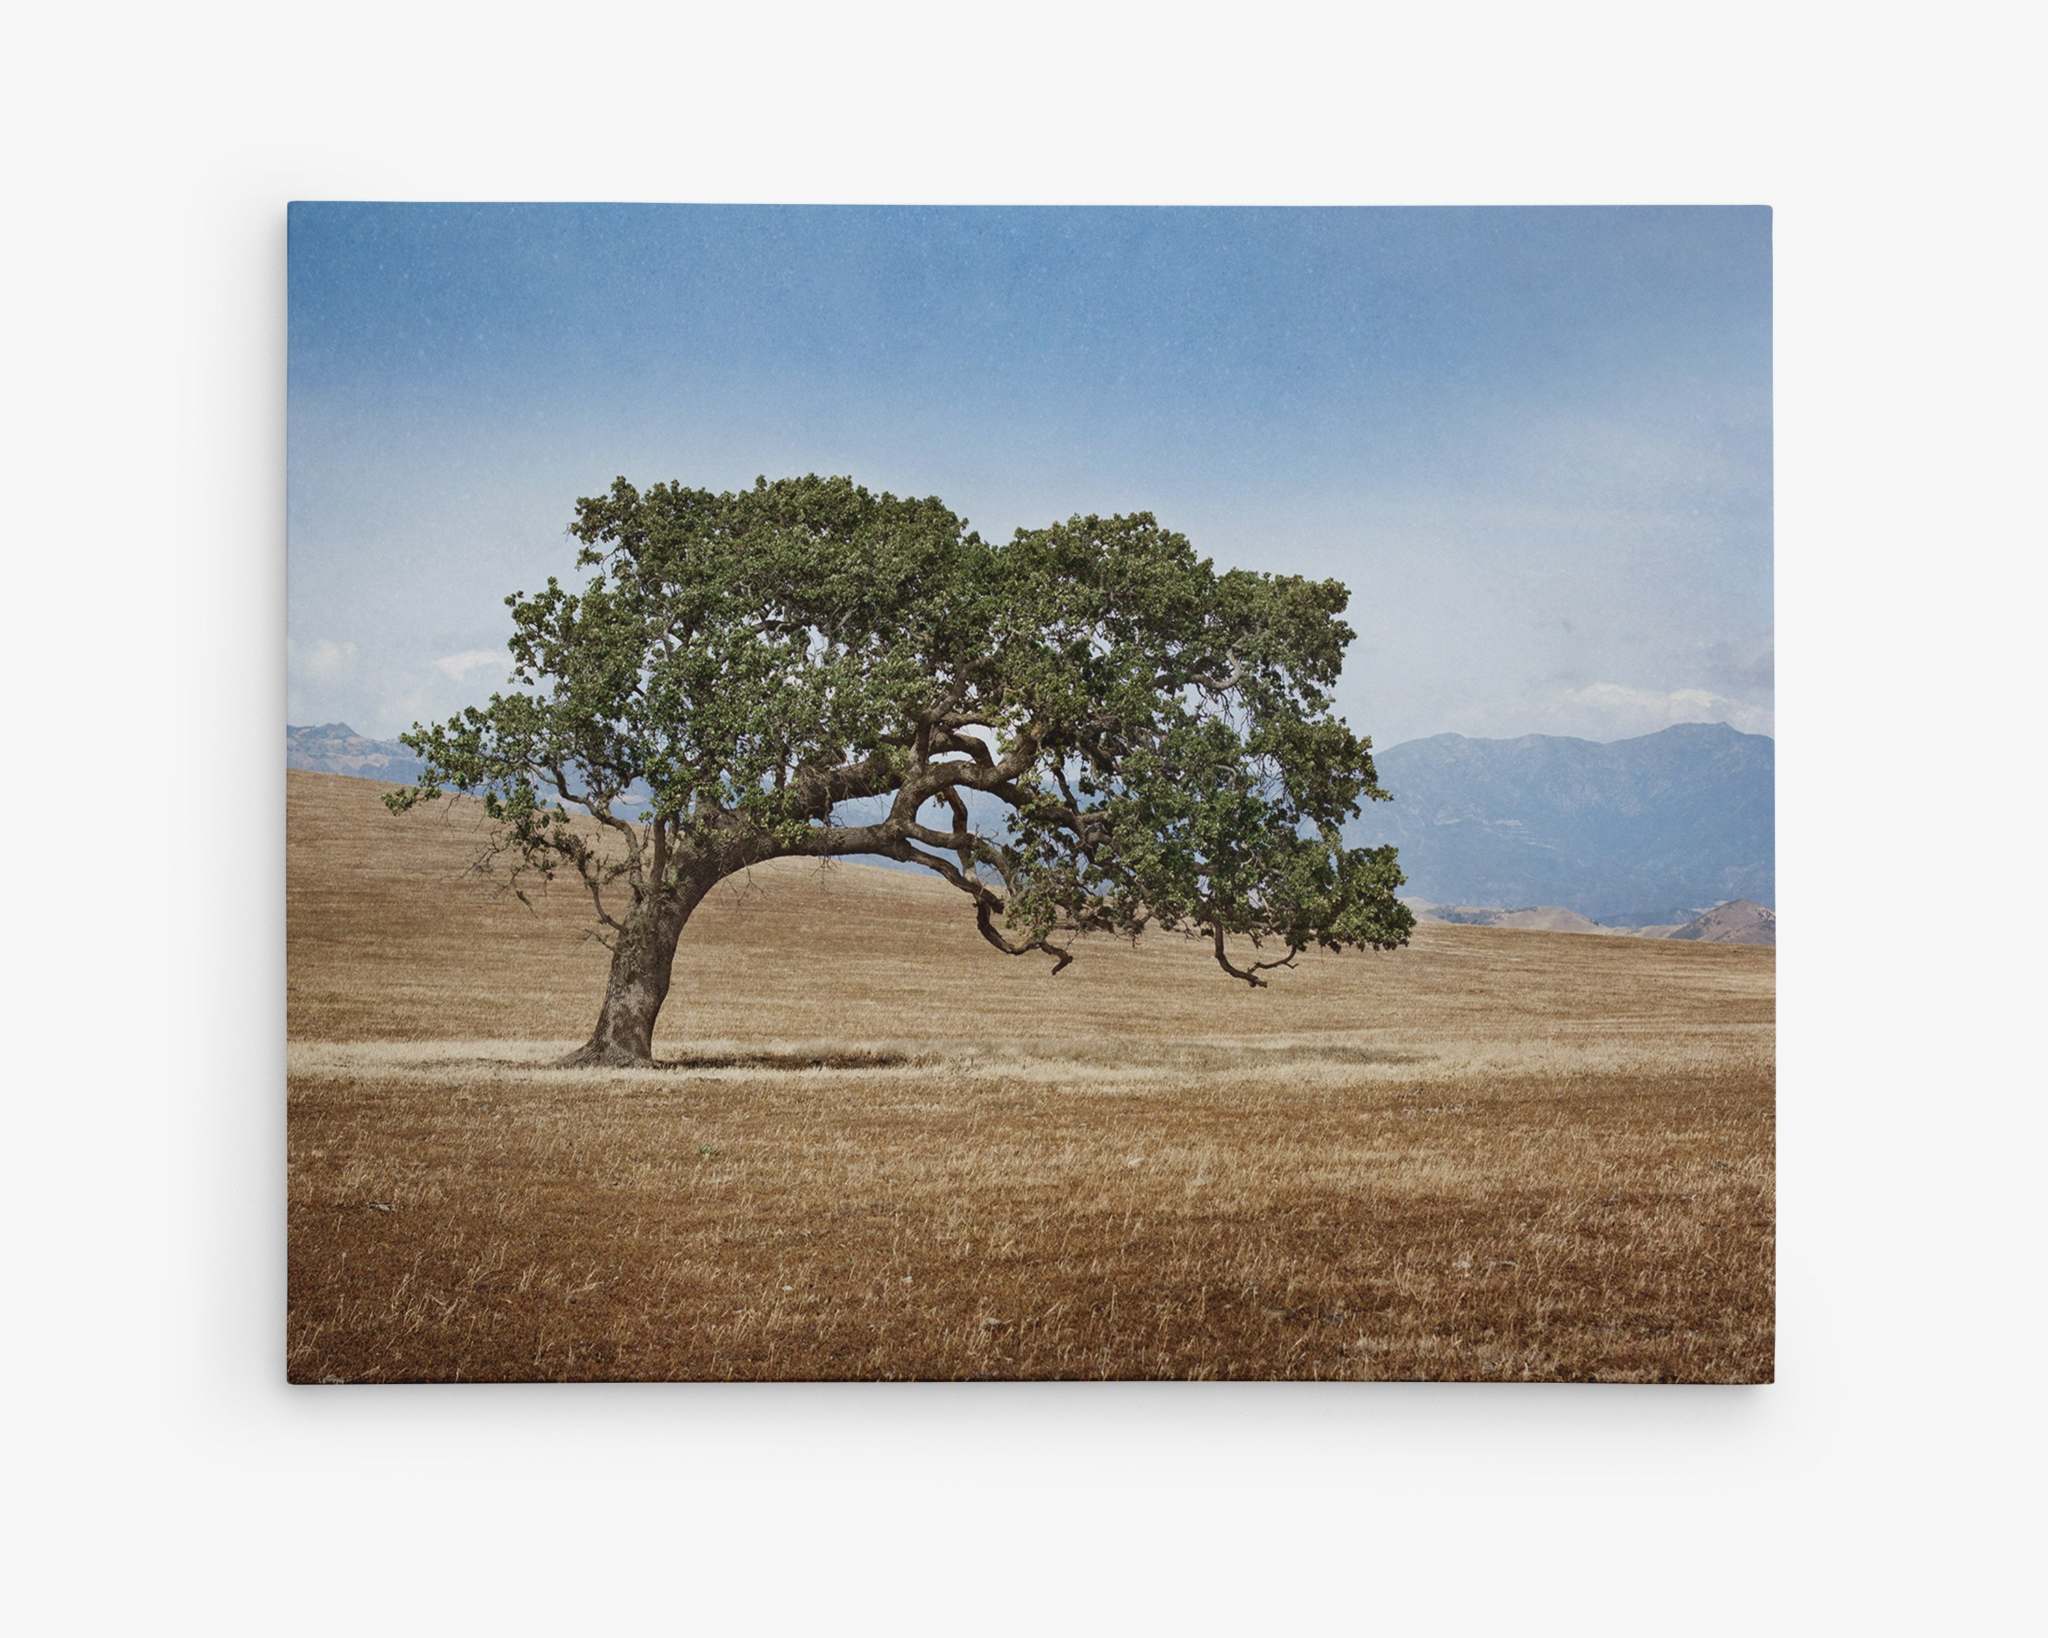 A solitary California Oak stands in an open, dry grassland under a clear blue sky. The tree has green foliage and a curved trunk. Distant mountains are visible on the horizon, rendering the scene serene and peaceful, perfect for immortalizing on Offley Green’s premium artist-grade California Landscape Wall Art, Oak Tree Canvas 'Windswept' or as a canvas gallery wrap.